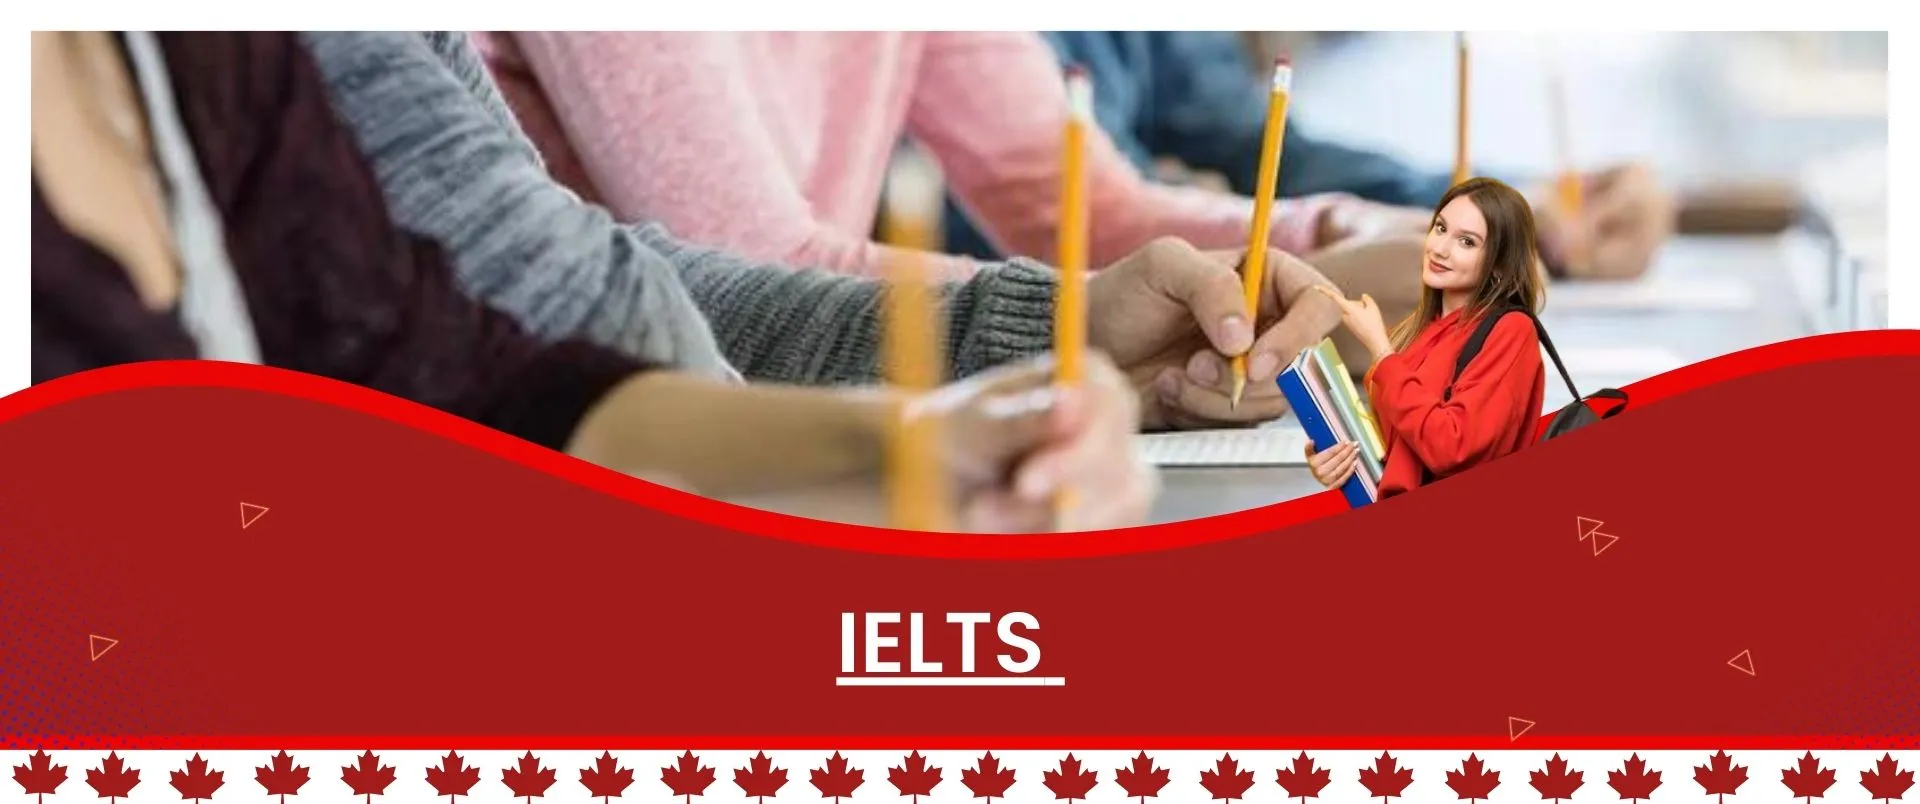  IELTS exam students writing on paper created by isha immigration